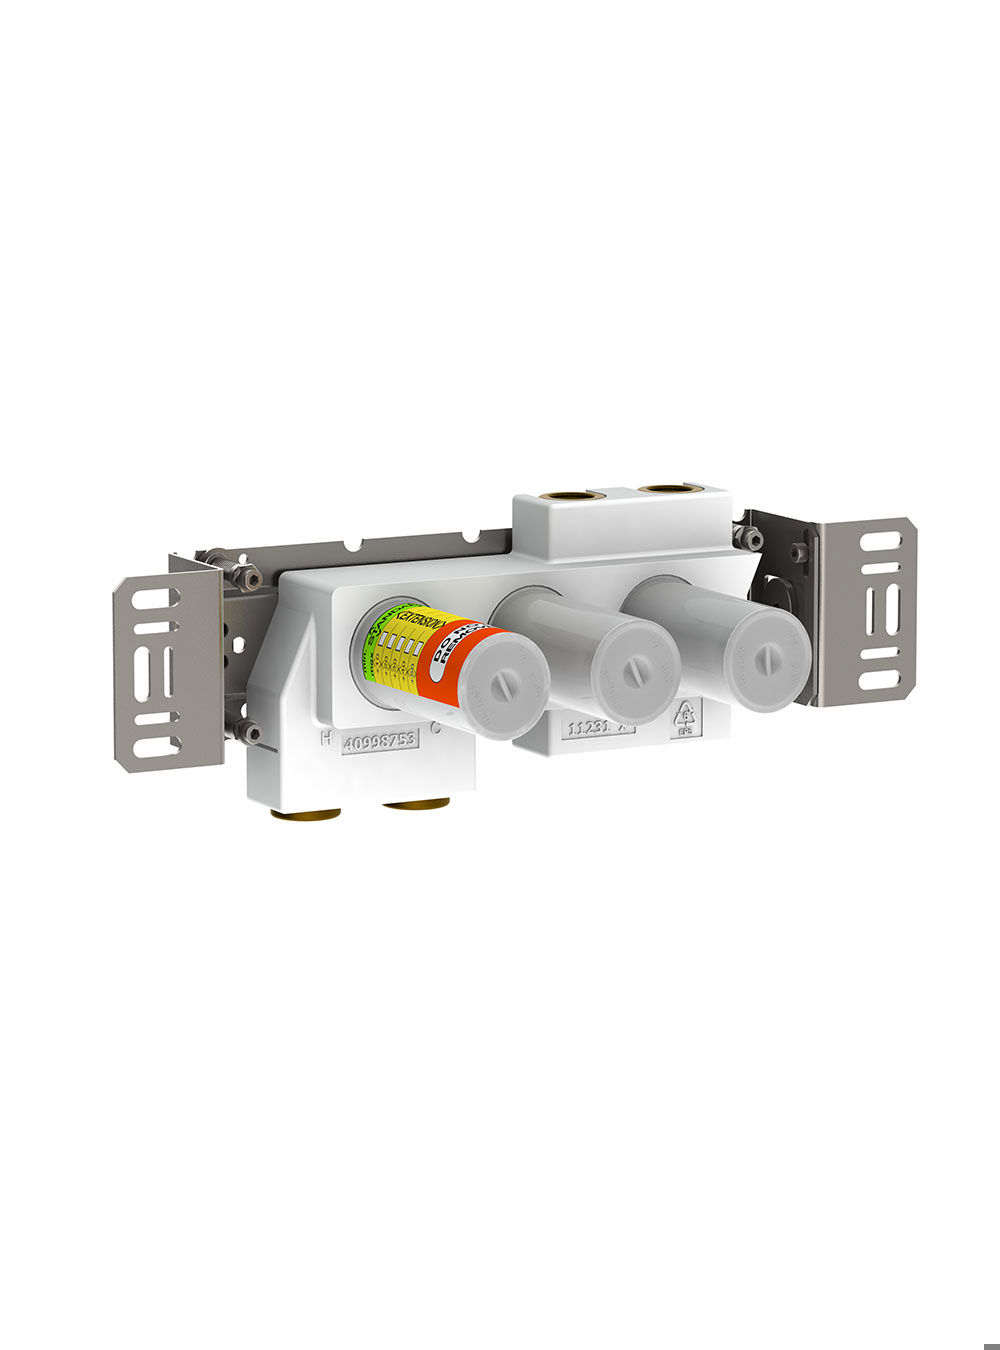 5400VA4: Thermostatic mixer with 4-way diverter.¾" connection to copper, steel, iron or pex pipe Work.